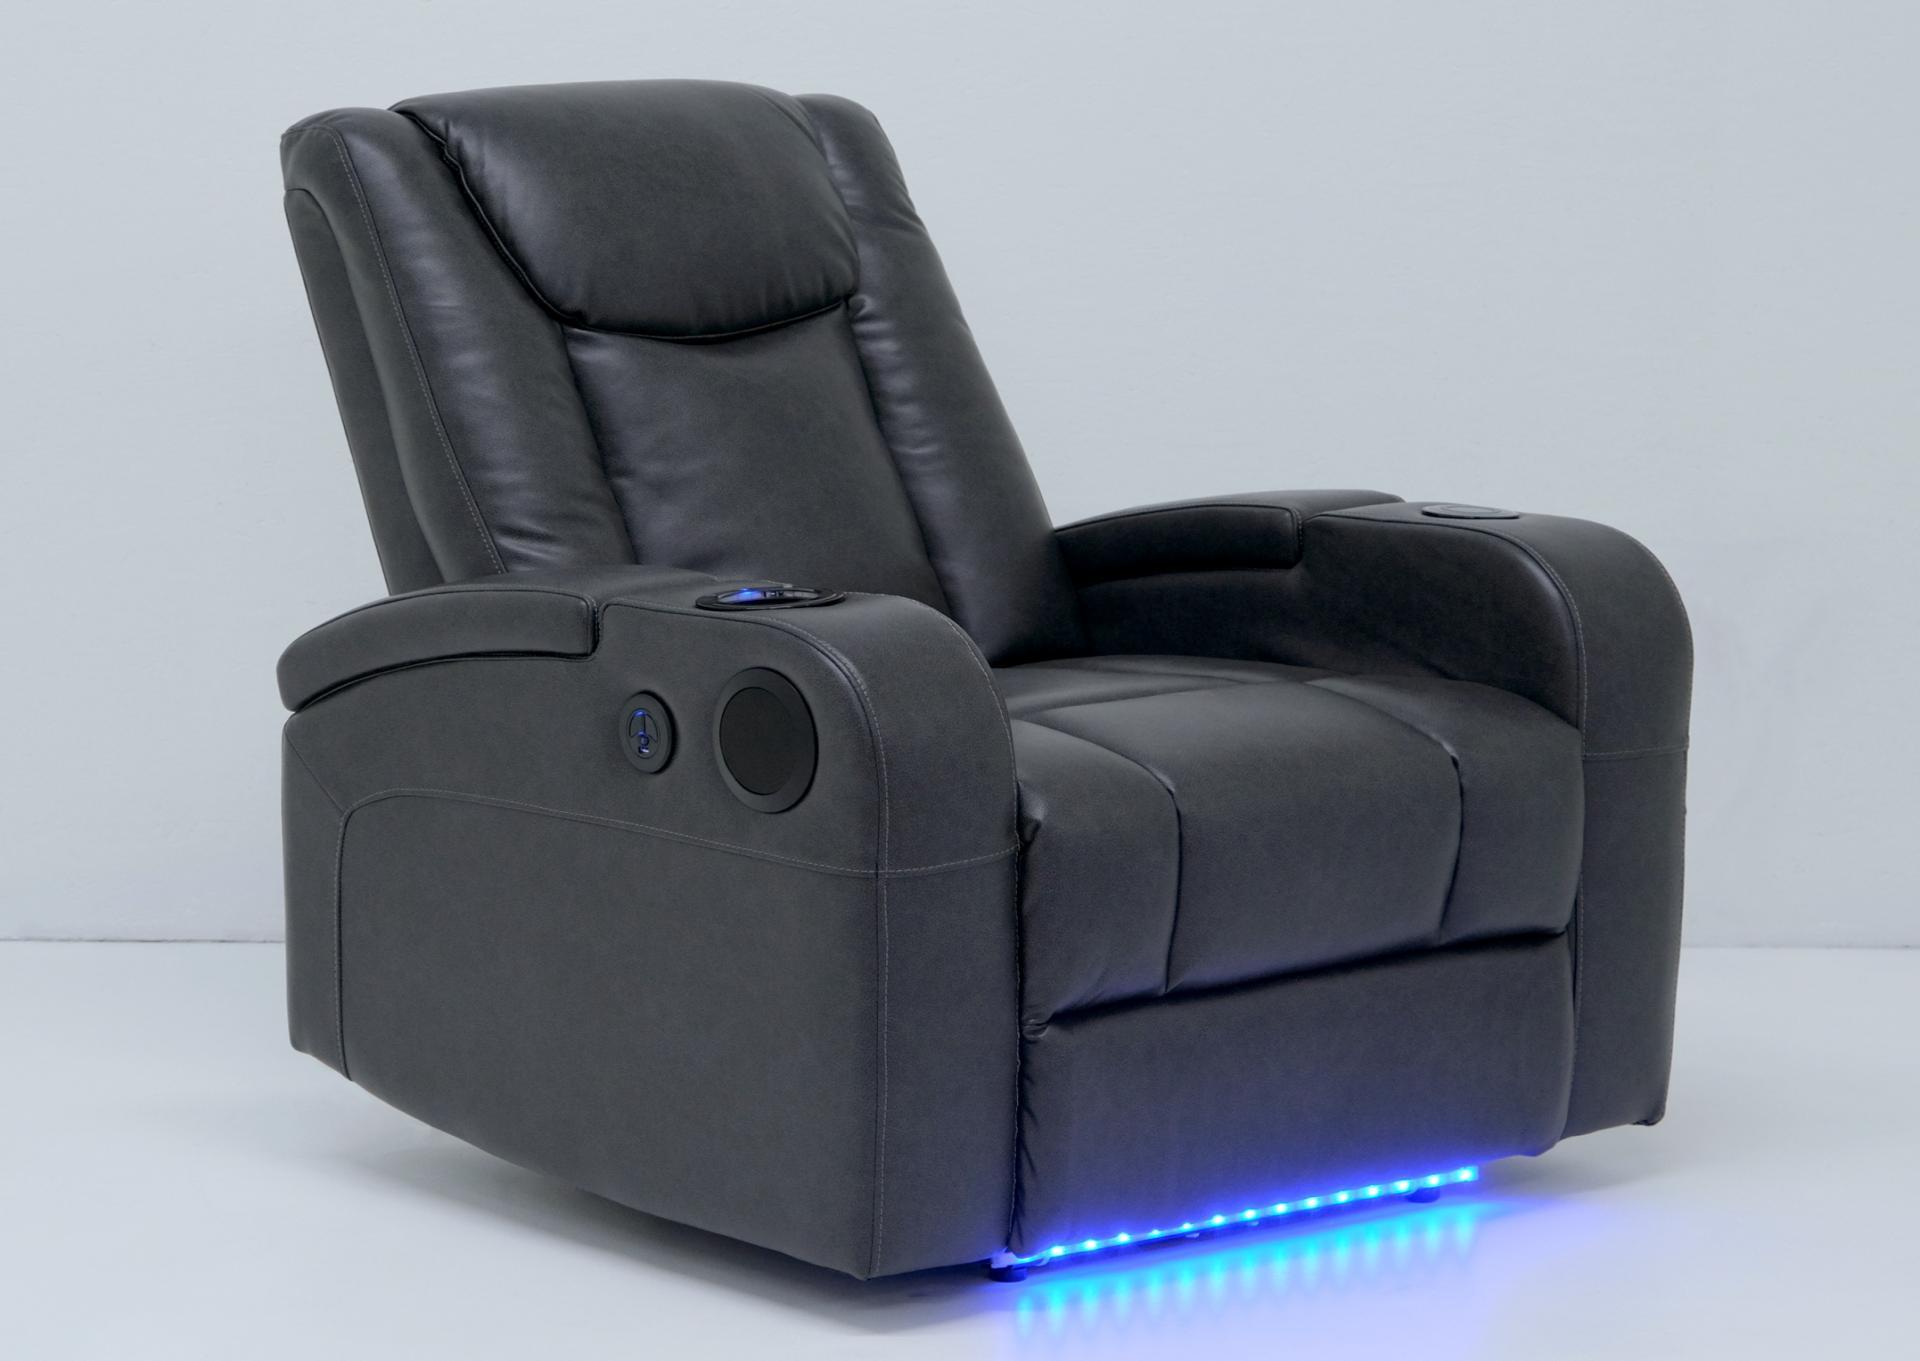 Tech Recliner w/USB, Wireless Charging, Bluetooth Speakers, Cooling Cupholder & LED Lighting,Emerald Home Furnishings